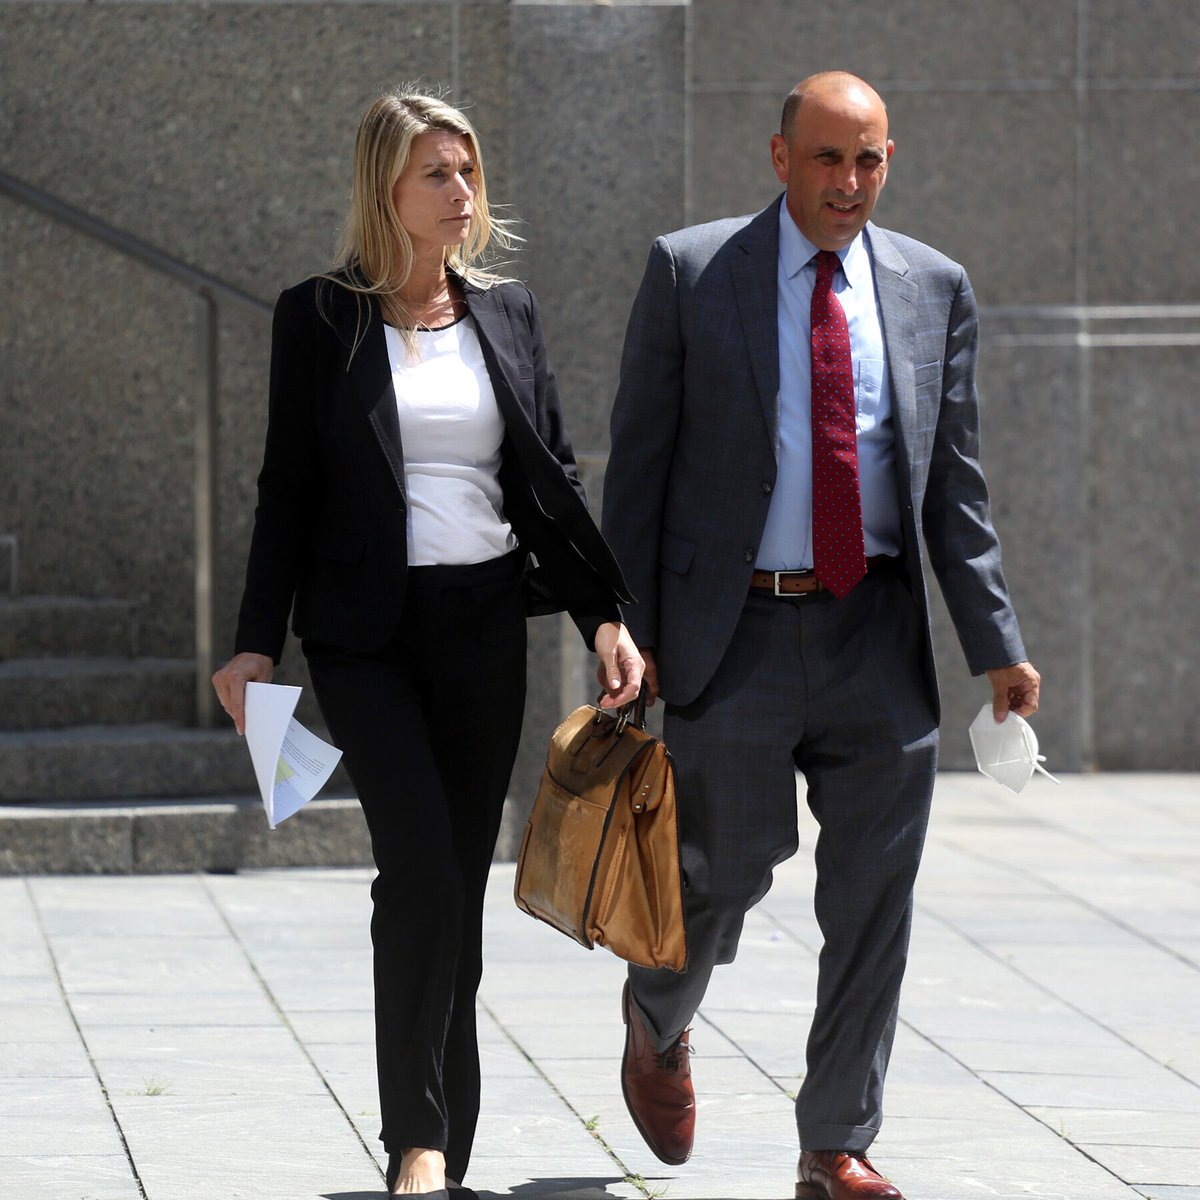 The DOJ asked a NY district judge to sentence Aimee Harris (40) to prison, along w 3 years of supervised release, for ‘stealing Ashley Biden’s diary.’ Harris came across Bidens diary, tax records, family photographs and her cellphone in September 2020, during a stay at a home…